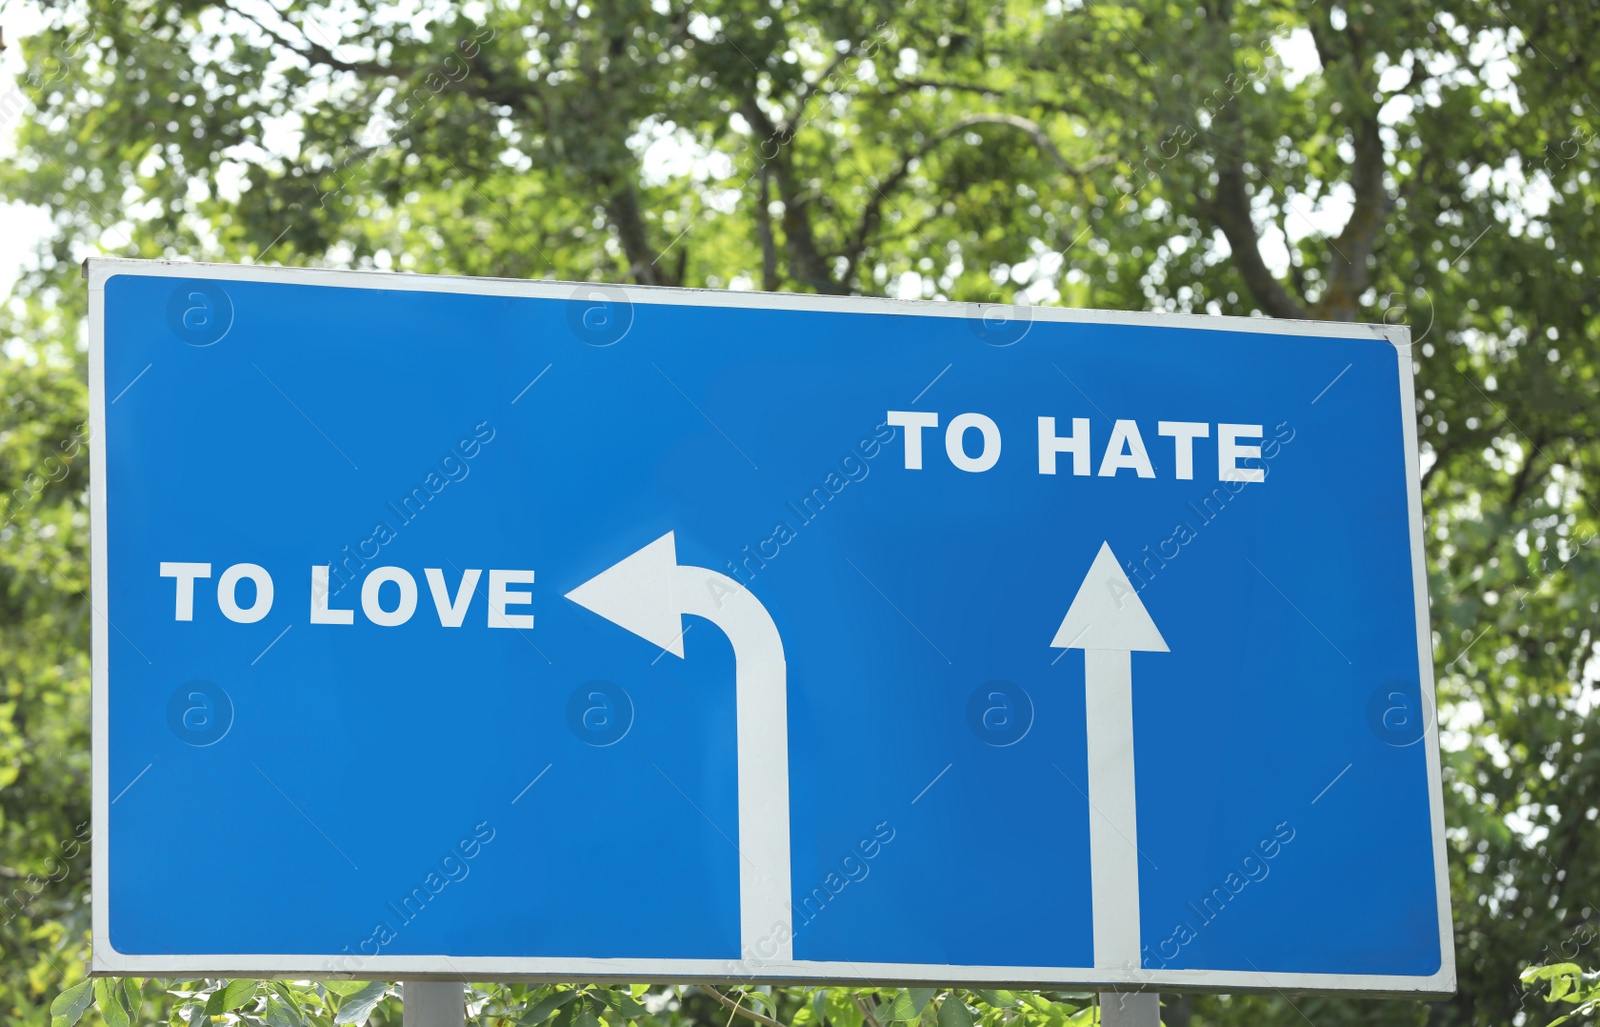 Image of Road sign with different directions - TO HATE or TO LOVE outdoors